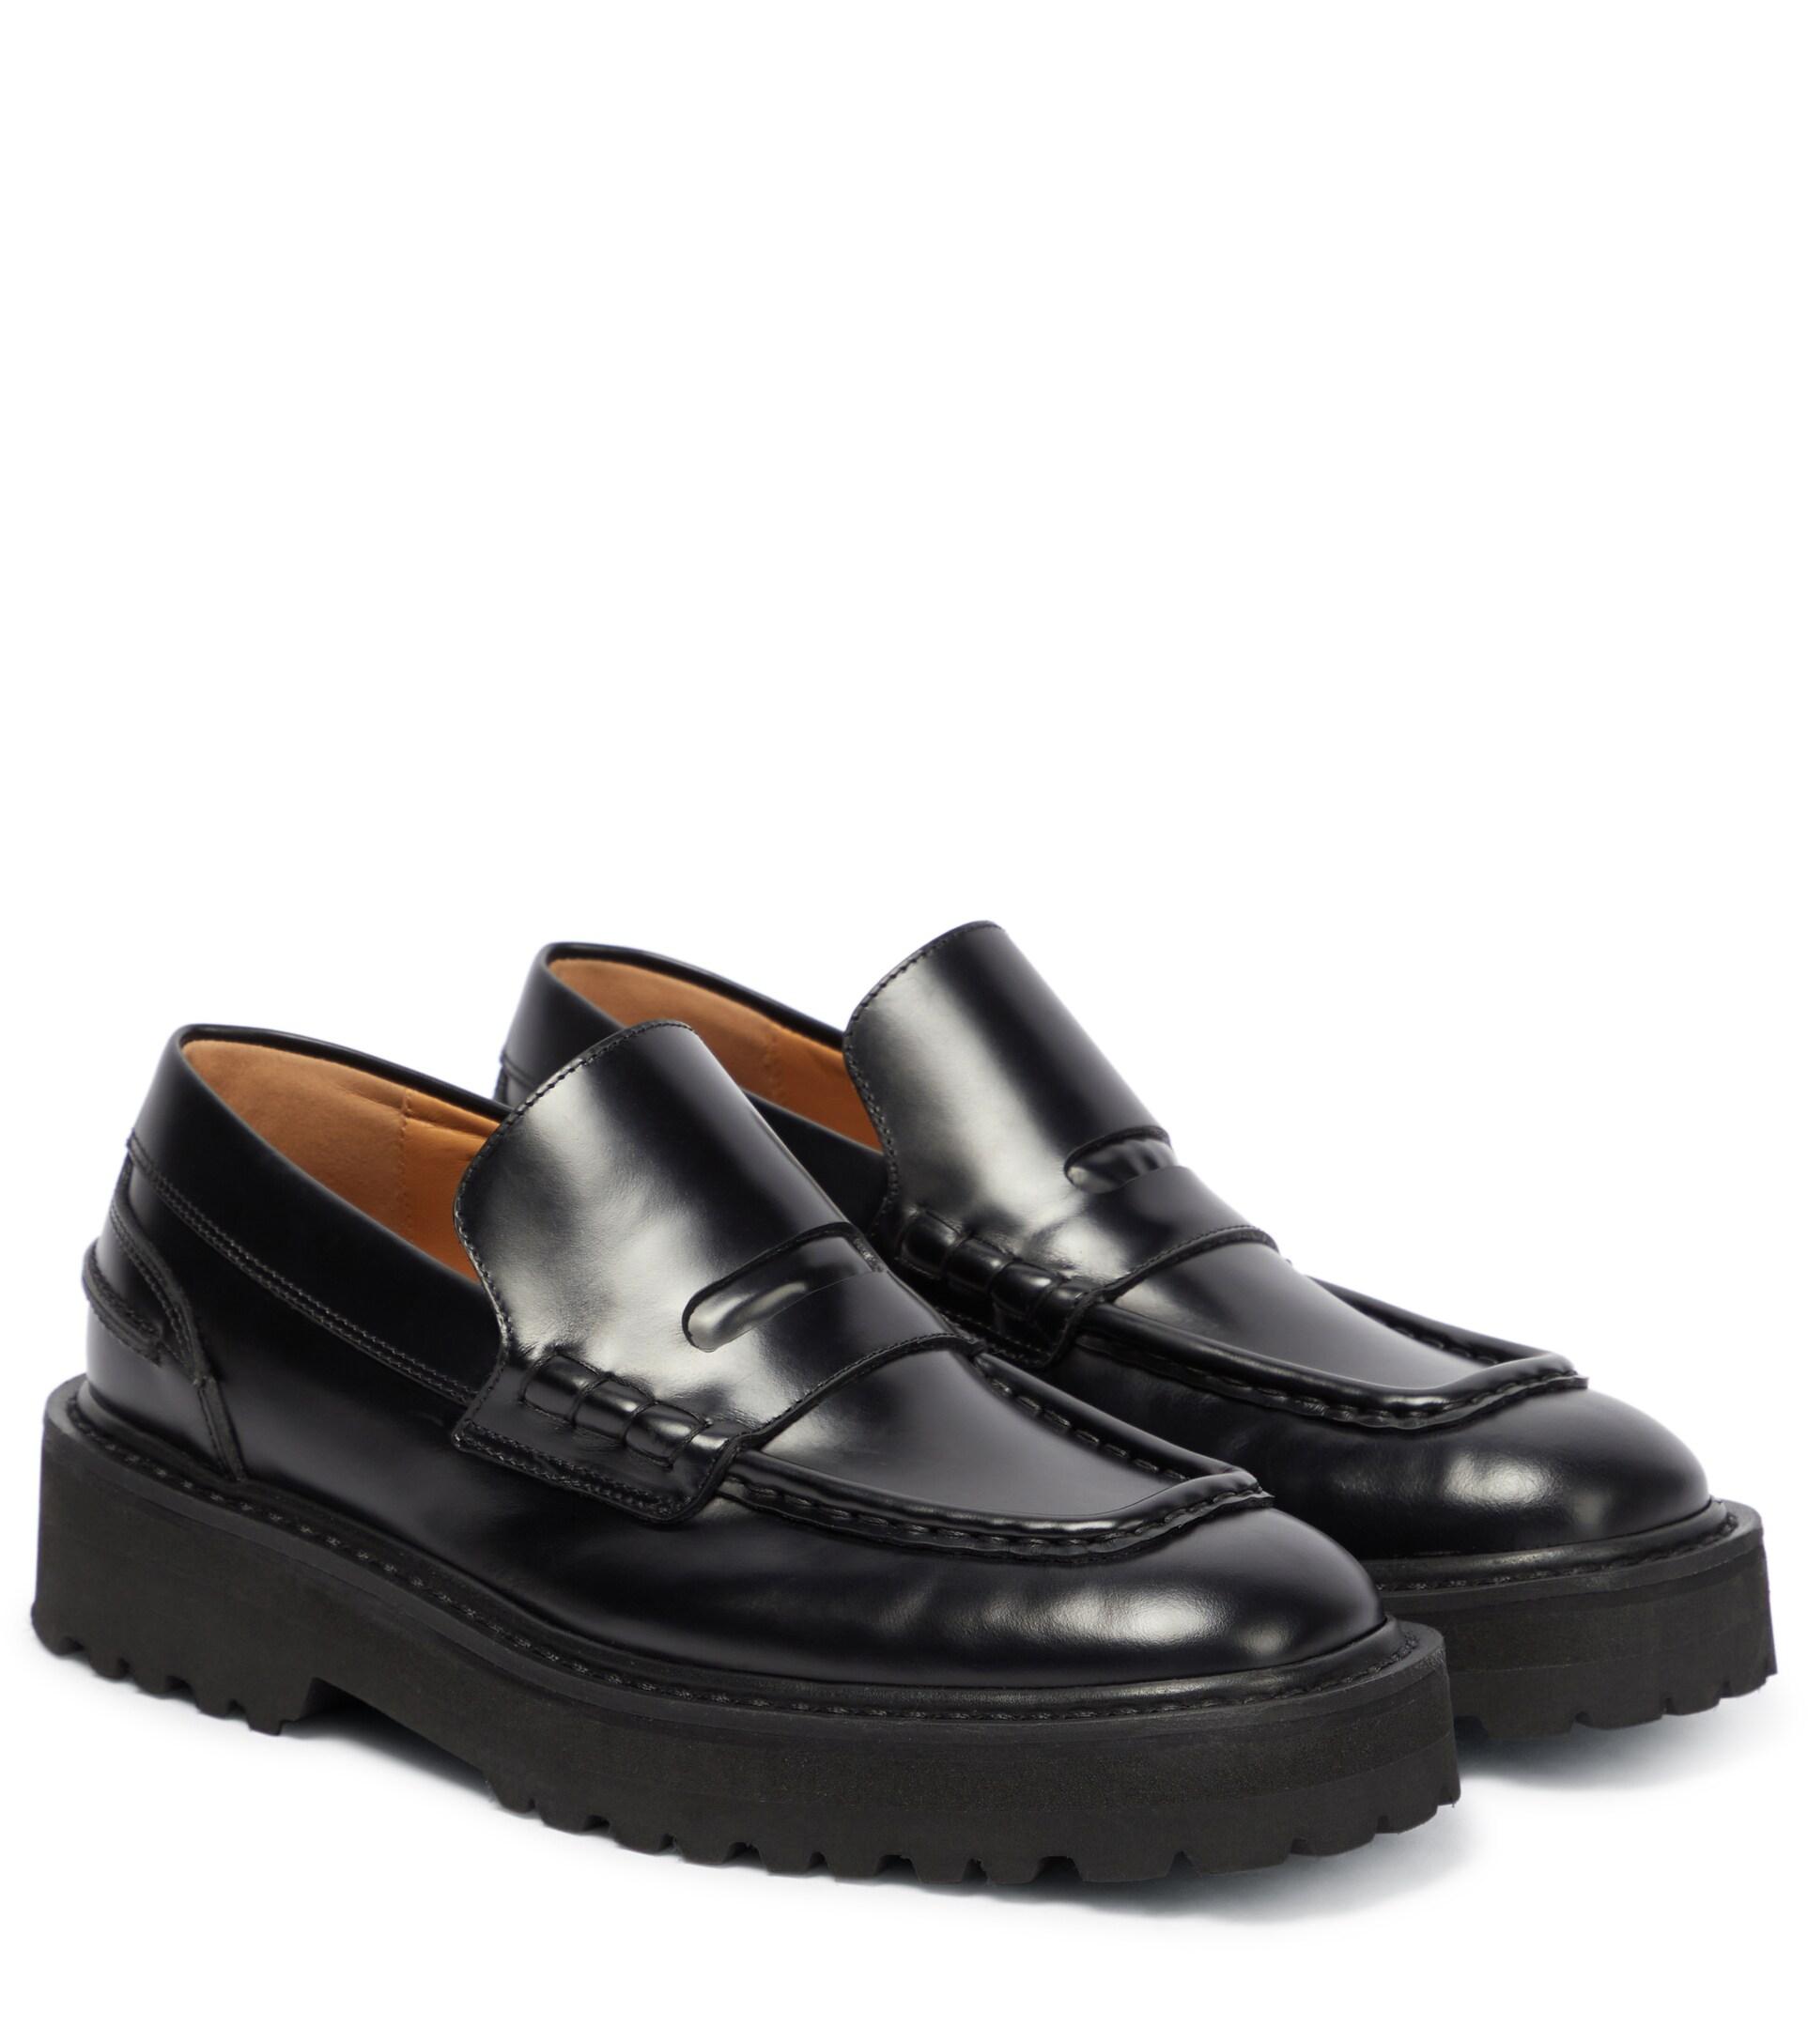 Dries Van Noten Leather Penny Loafers in Black | Lyst